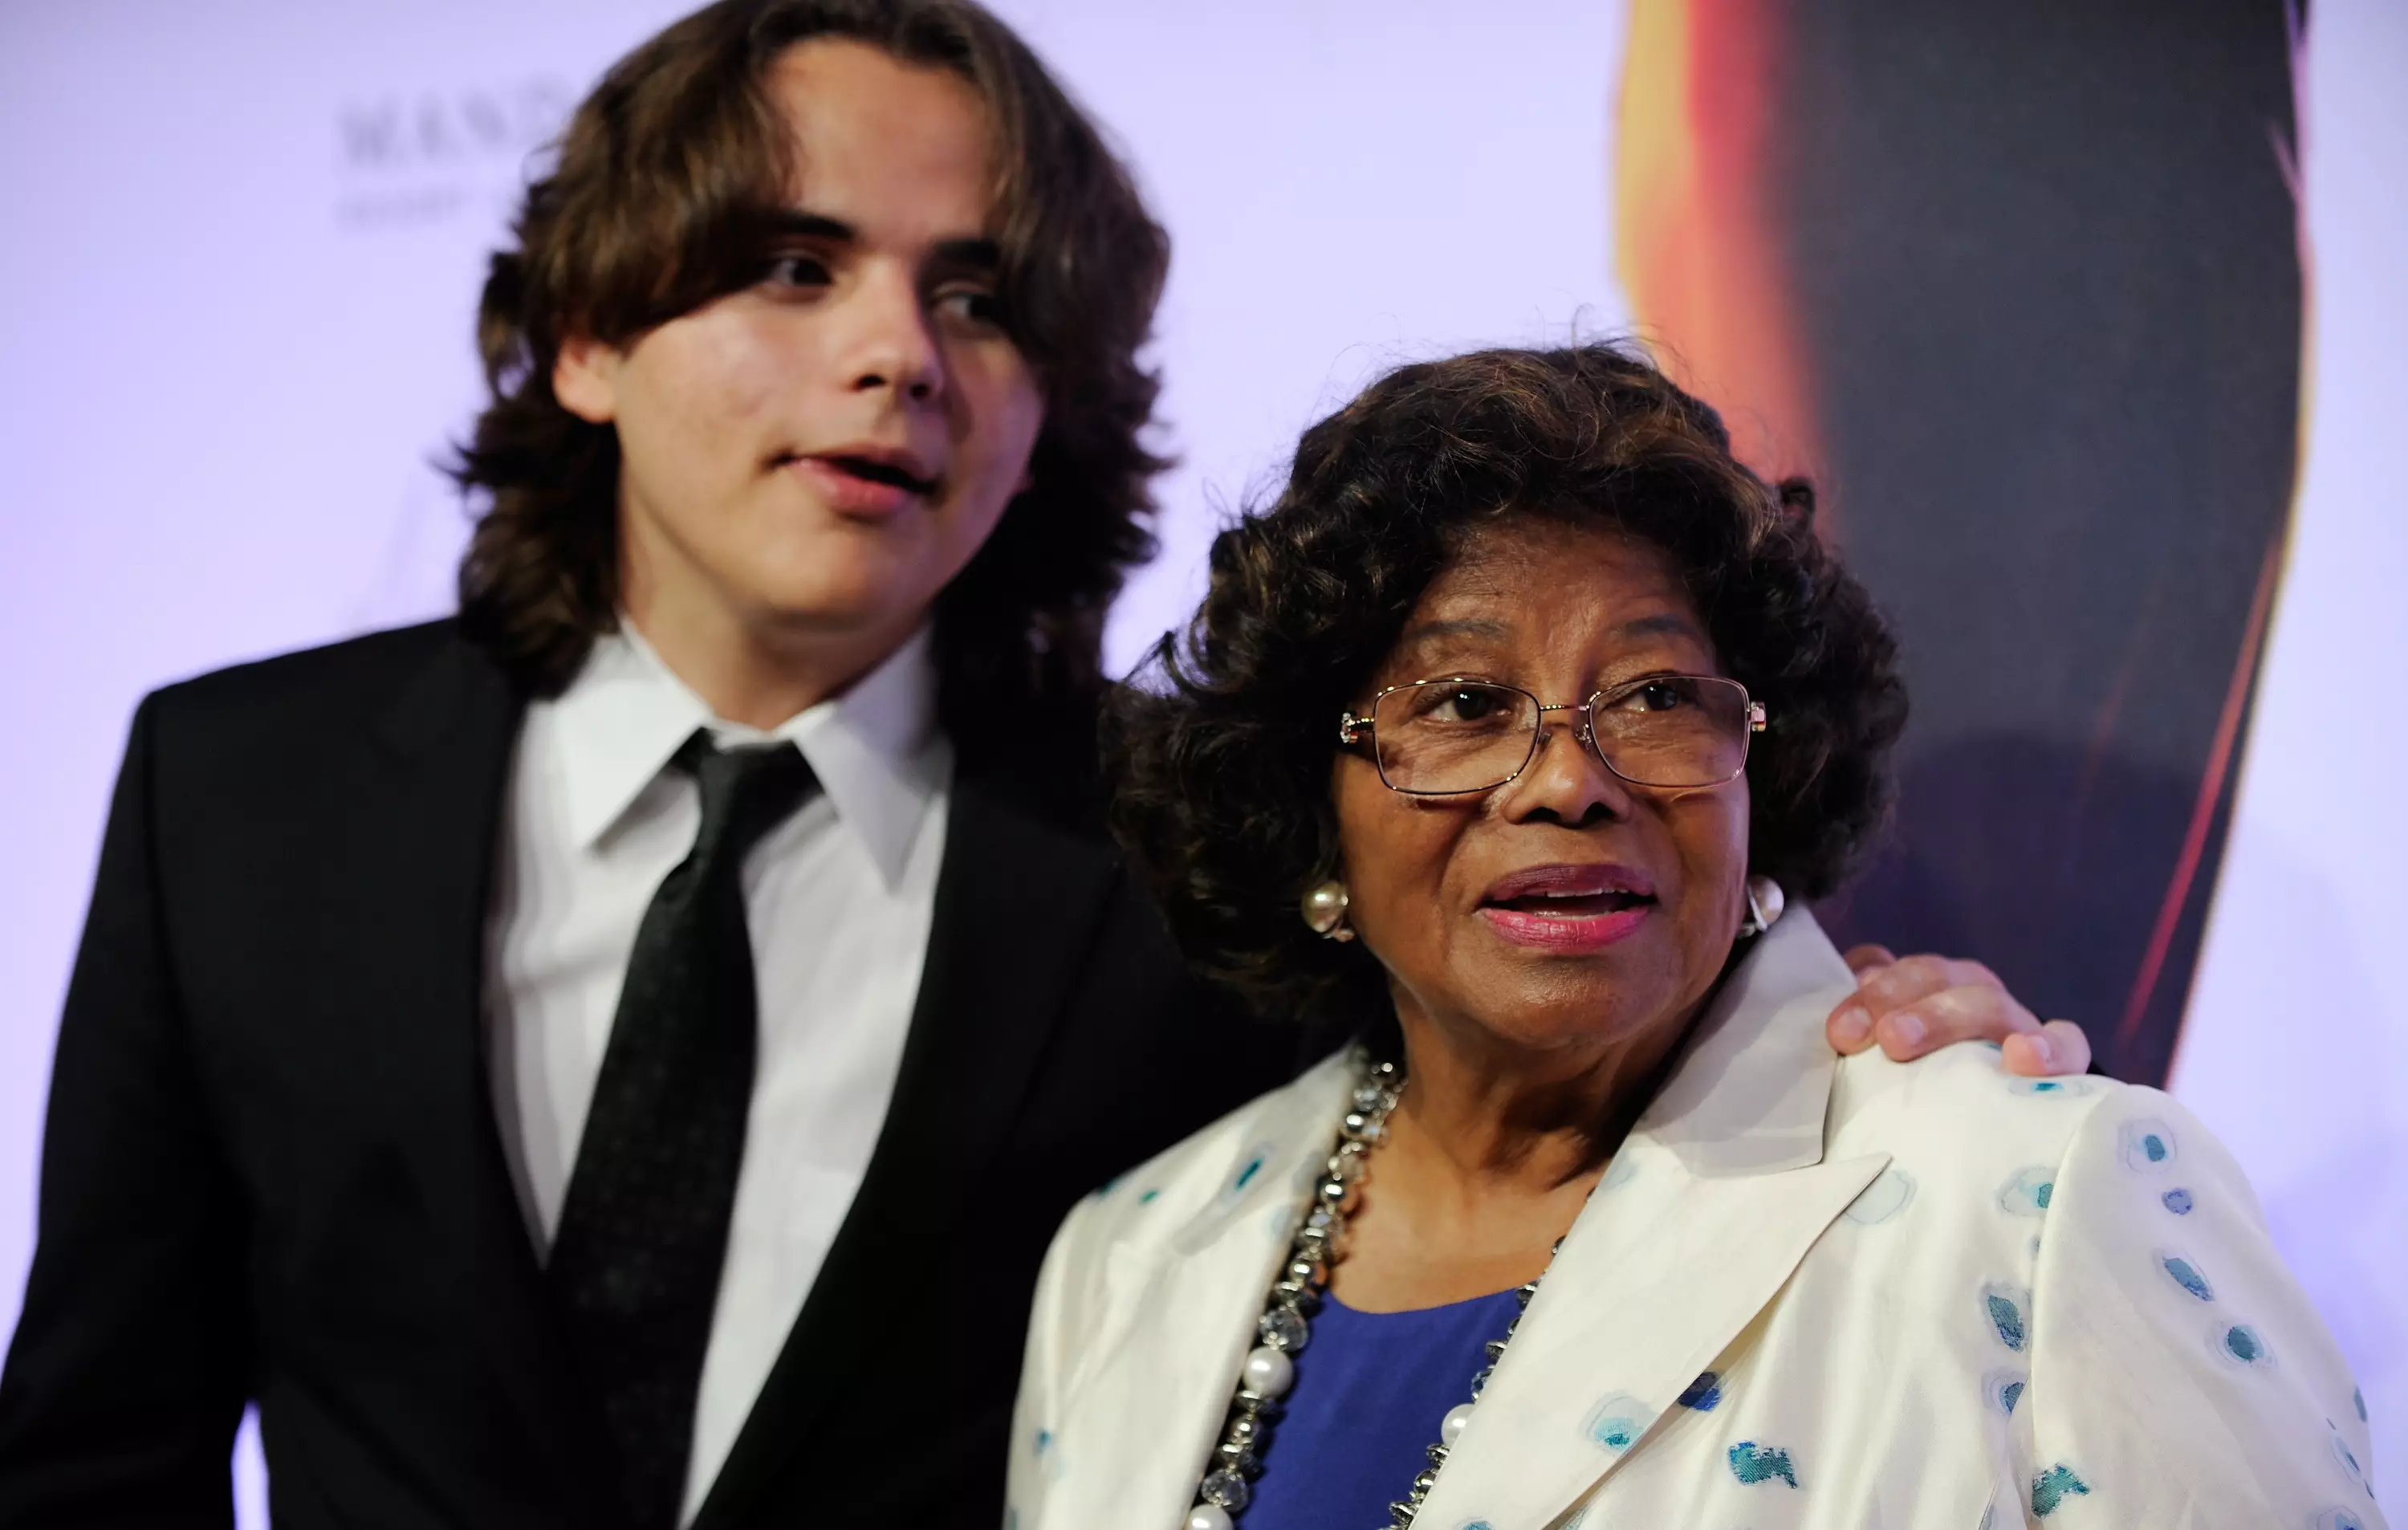 Prince Jackson Speaks About His Father's Death And Those Masks